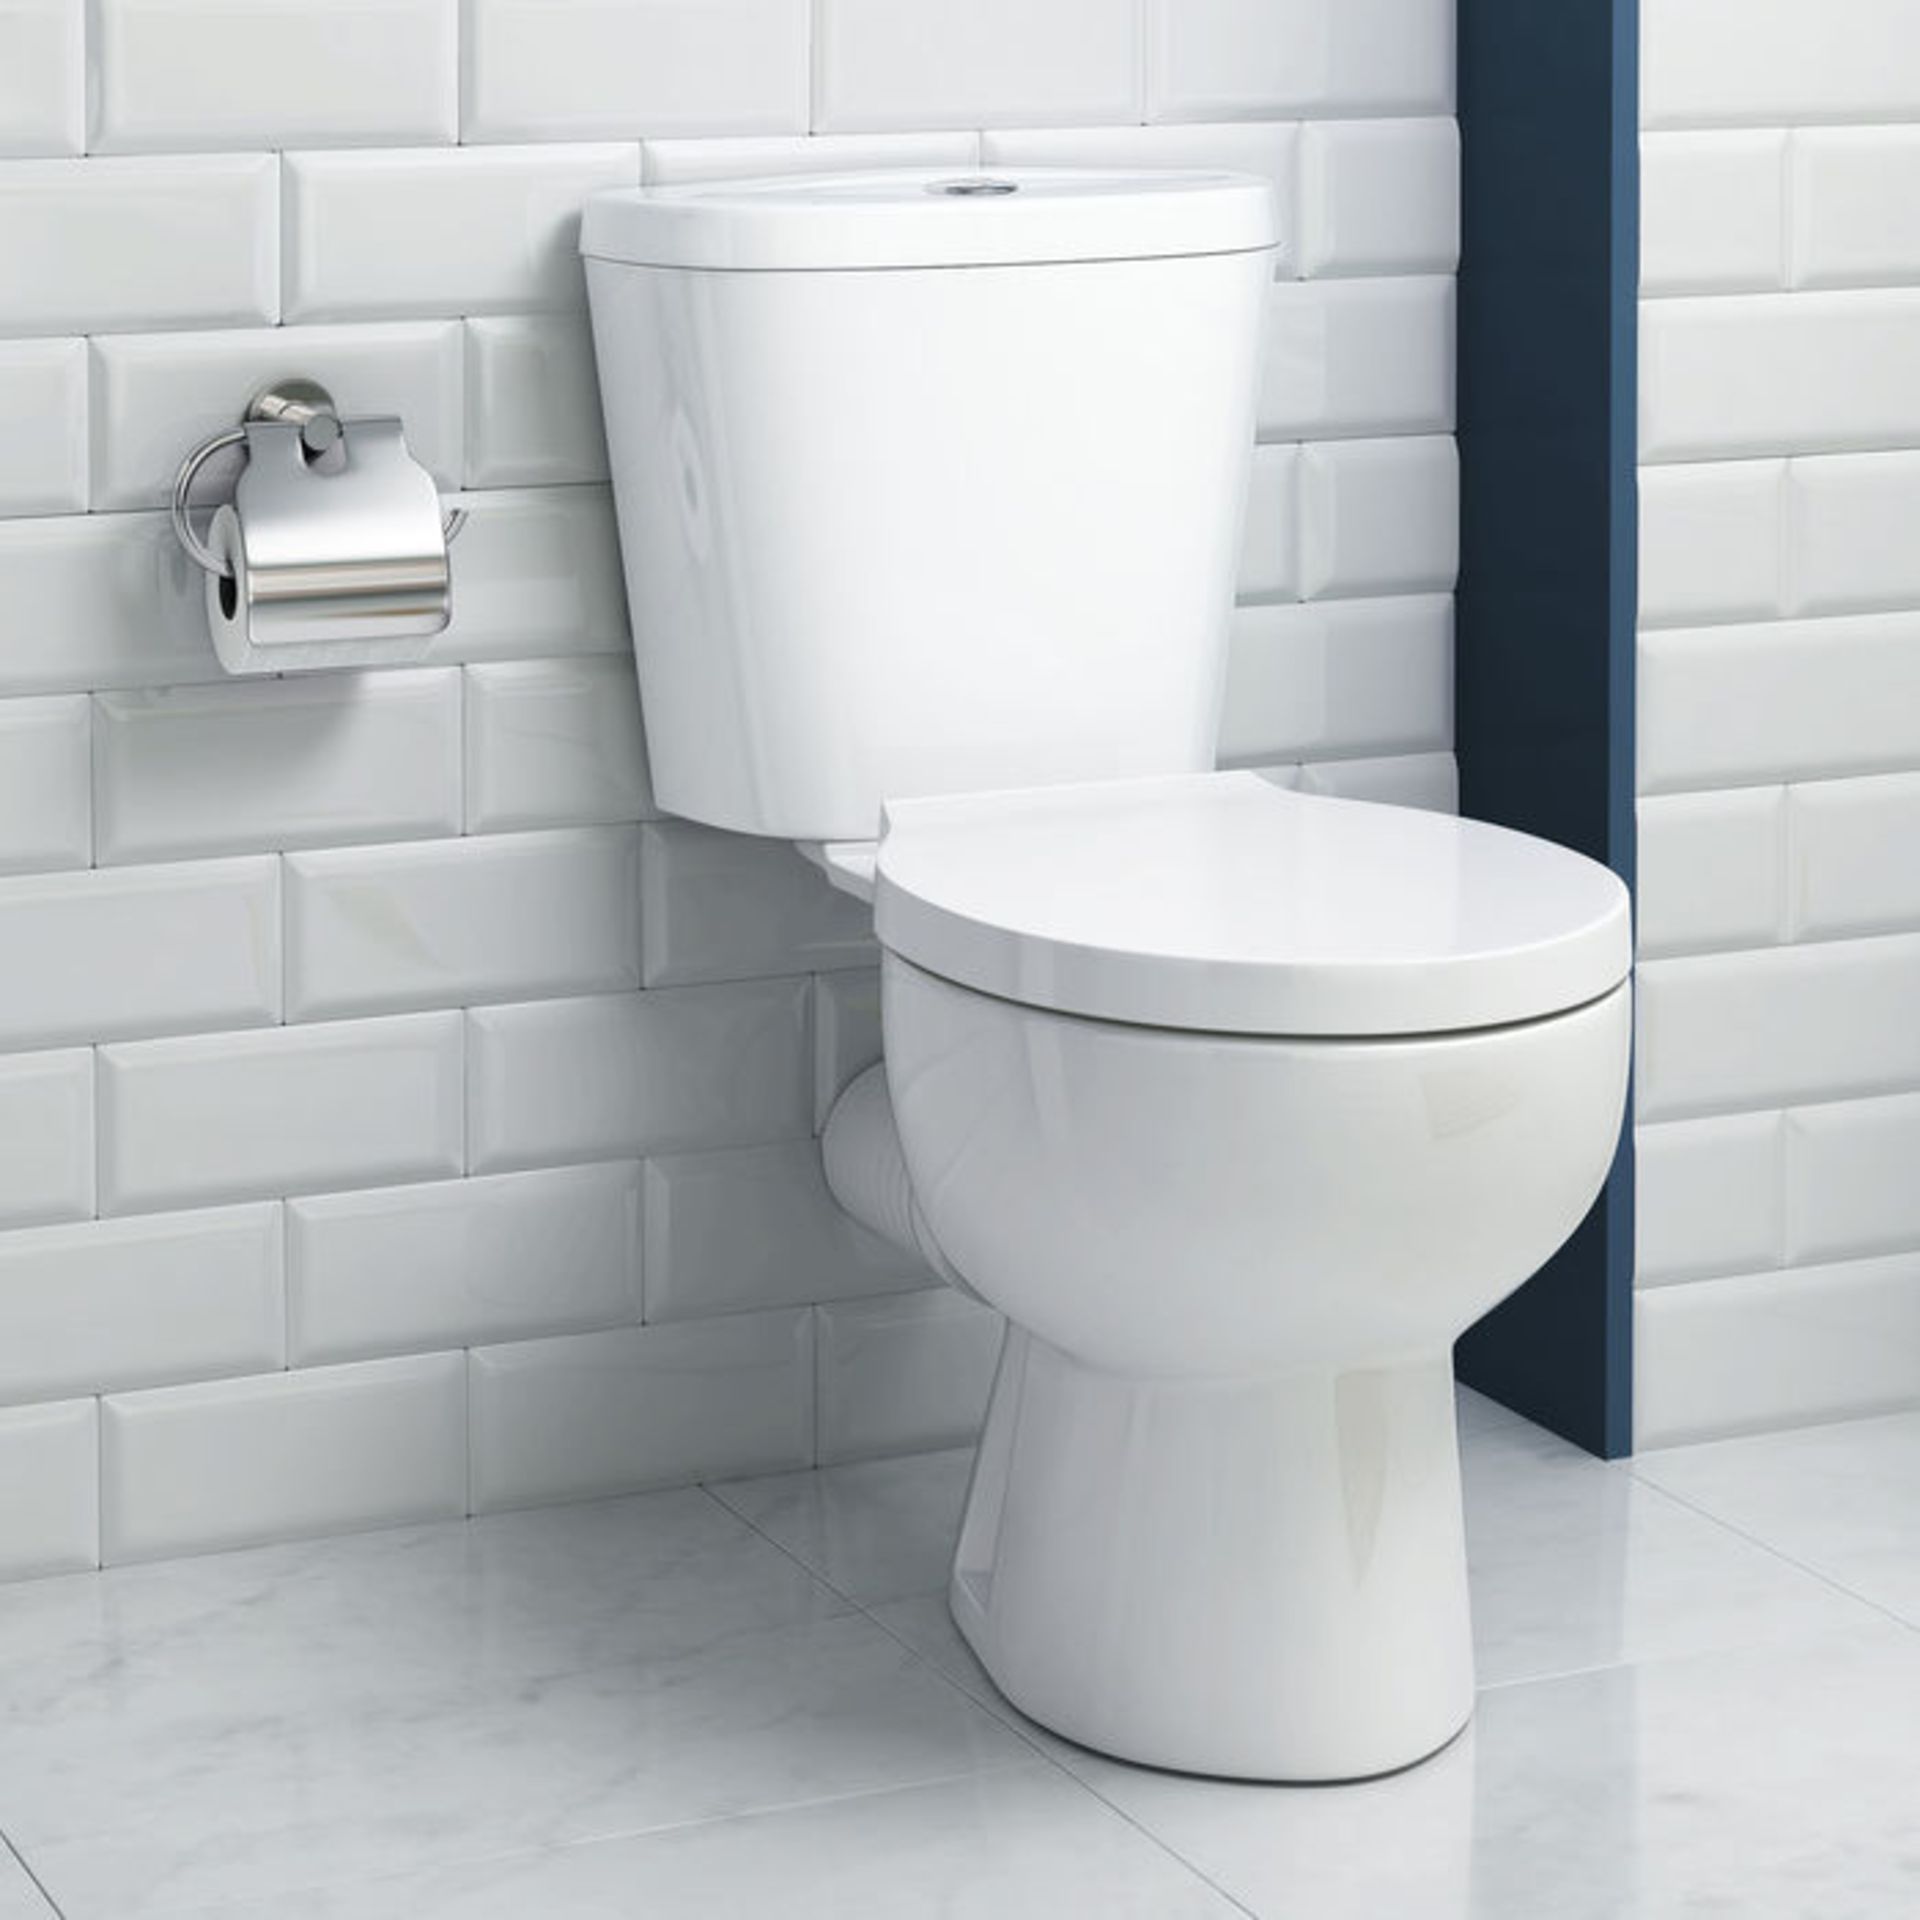 (AH26) Quartz Close Coupled Toilet. We love this because it is simply great value! Made from White